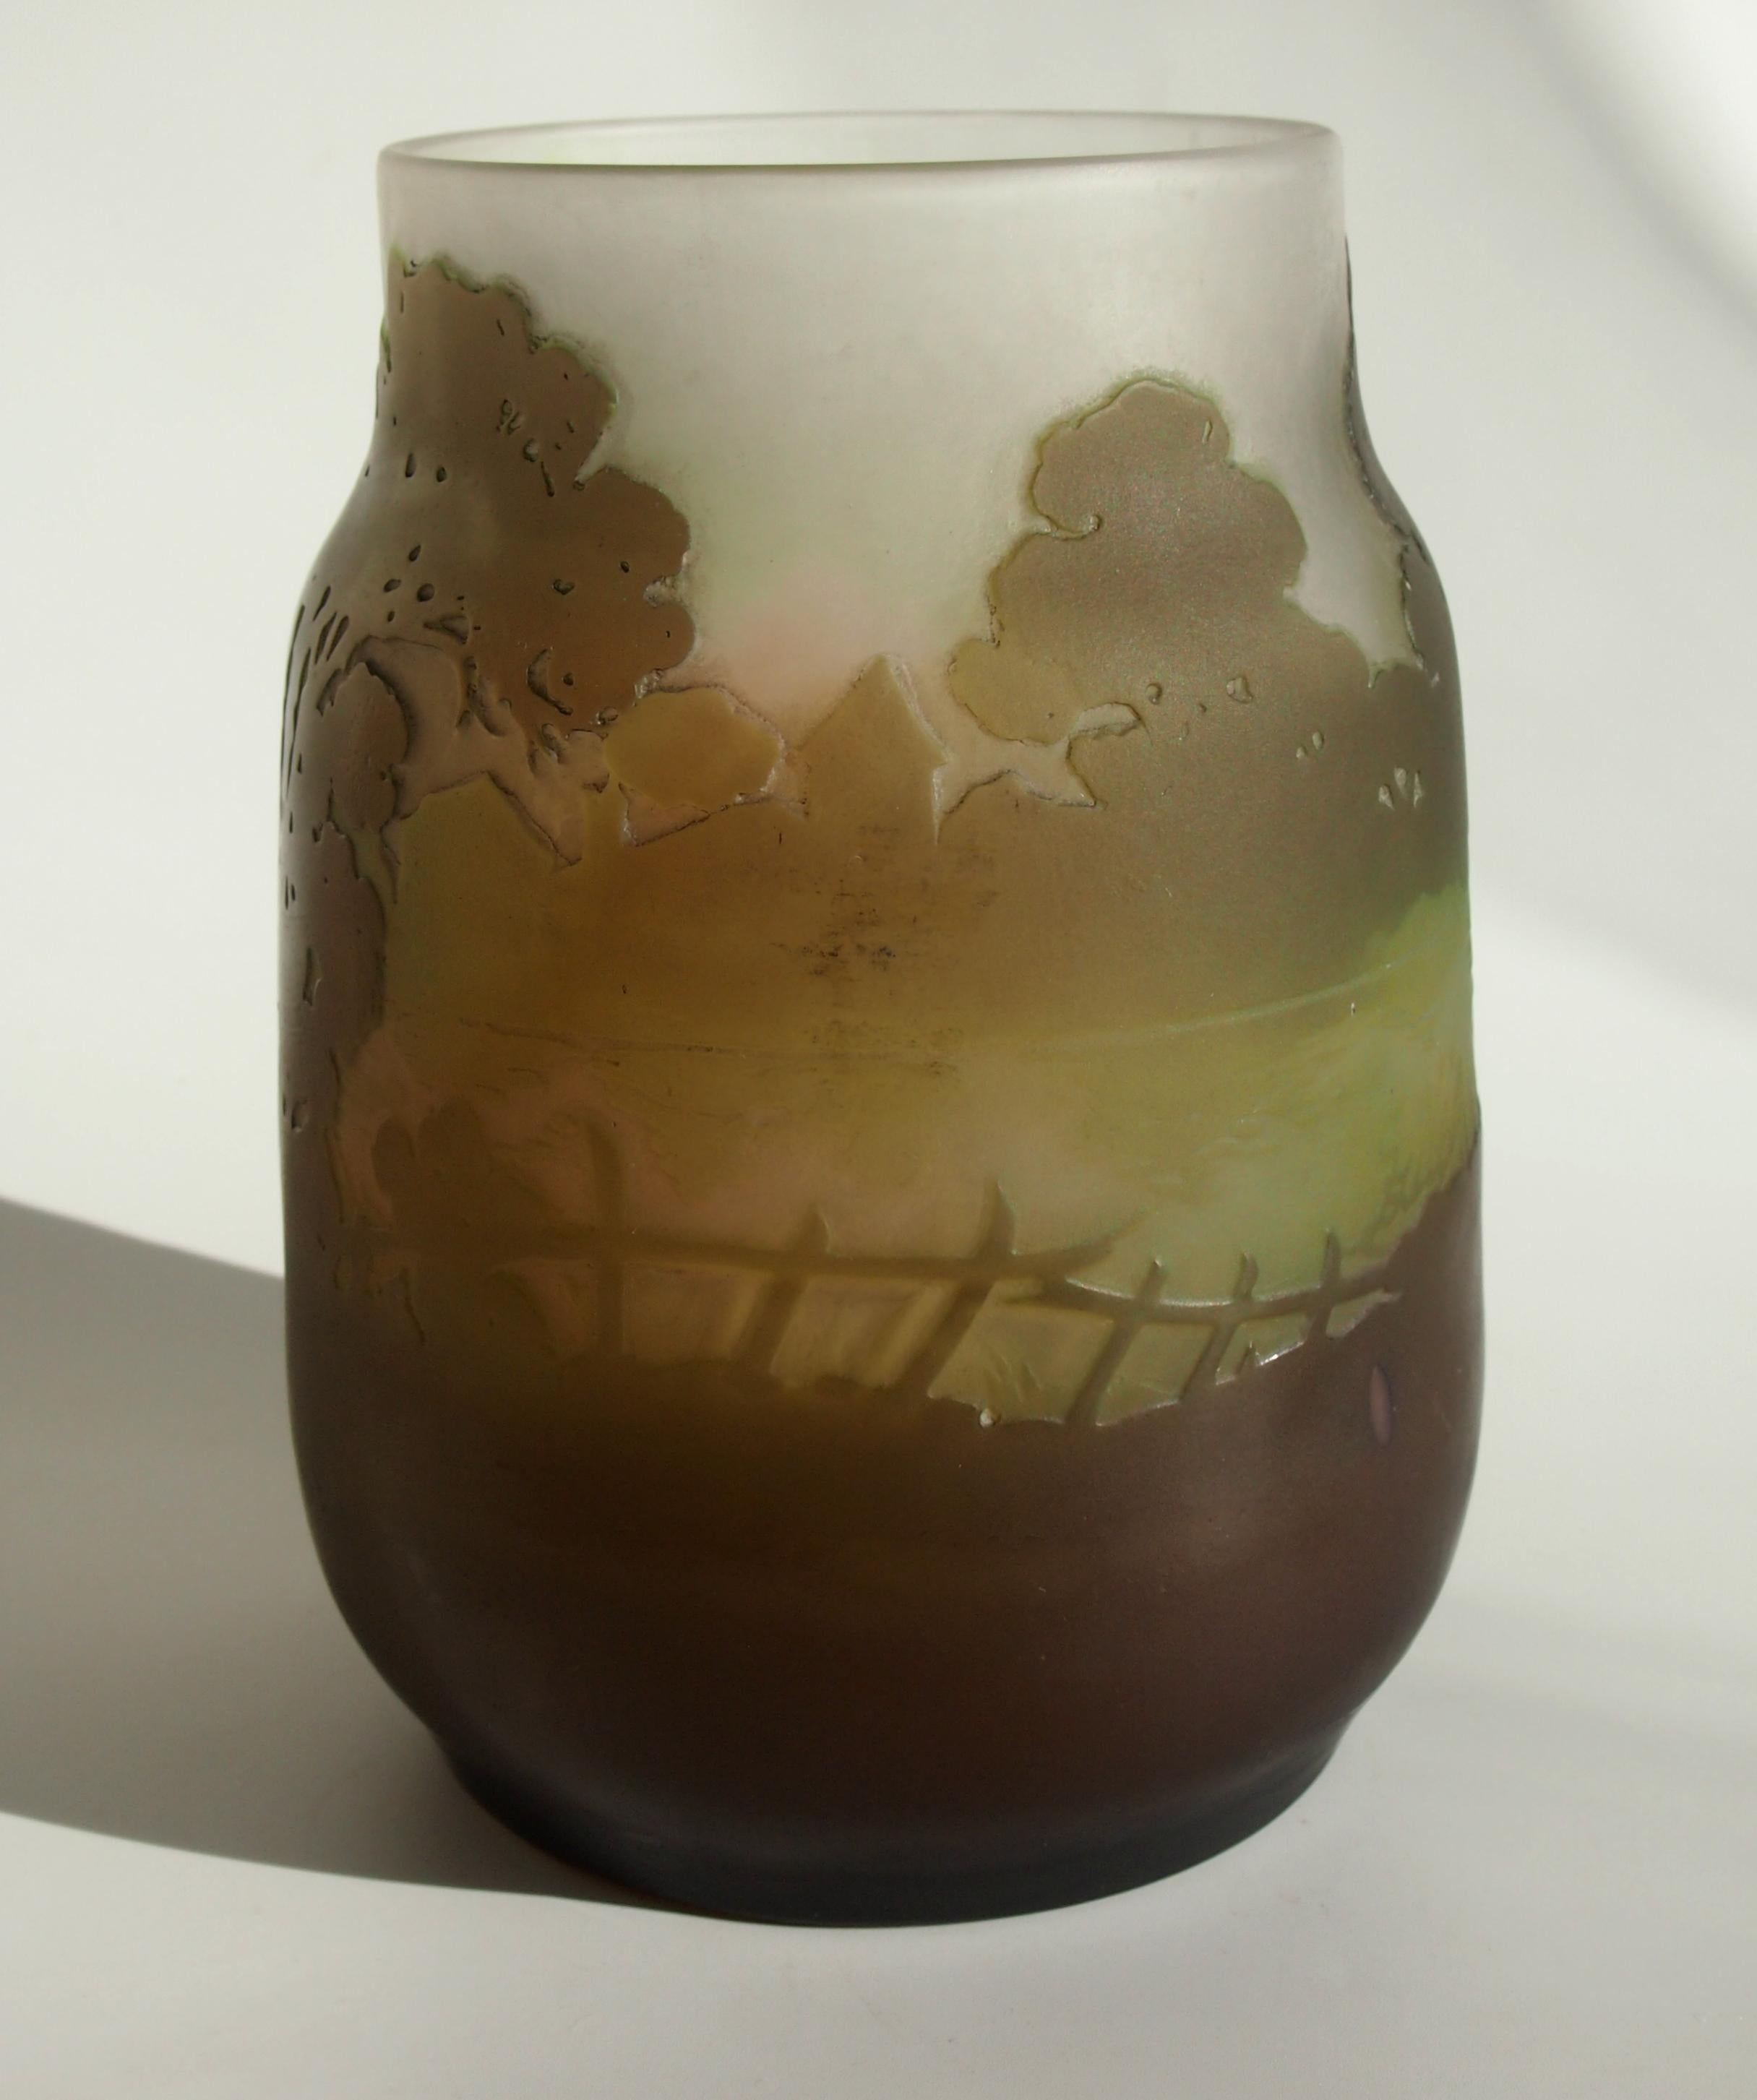 Exceptional Art Nouveau Emile Galle Cameo landscape vase, depicting a very early morning waterside scene, with outline trees, buildings and shrubs, with swirling mists over a flowing river and little ramshackle fences. Signed in cameo c 1910